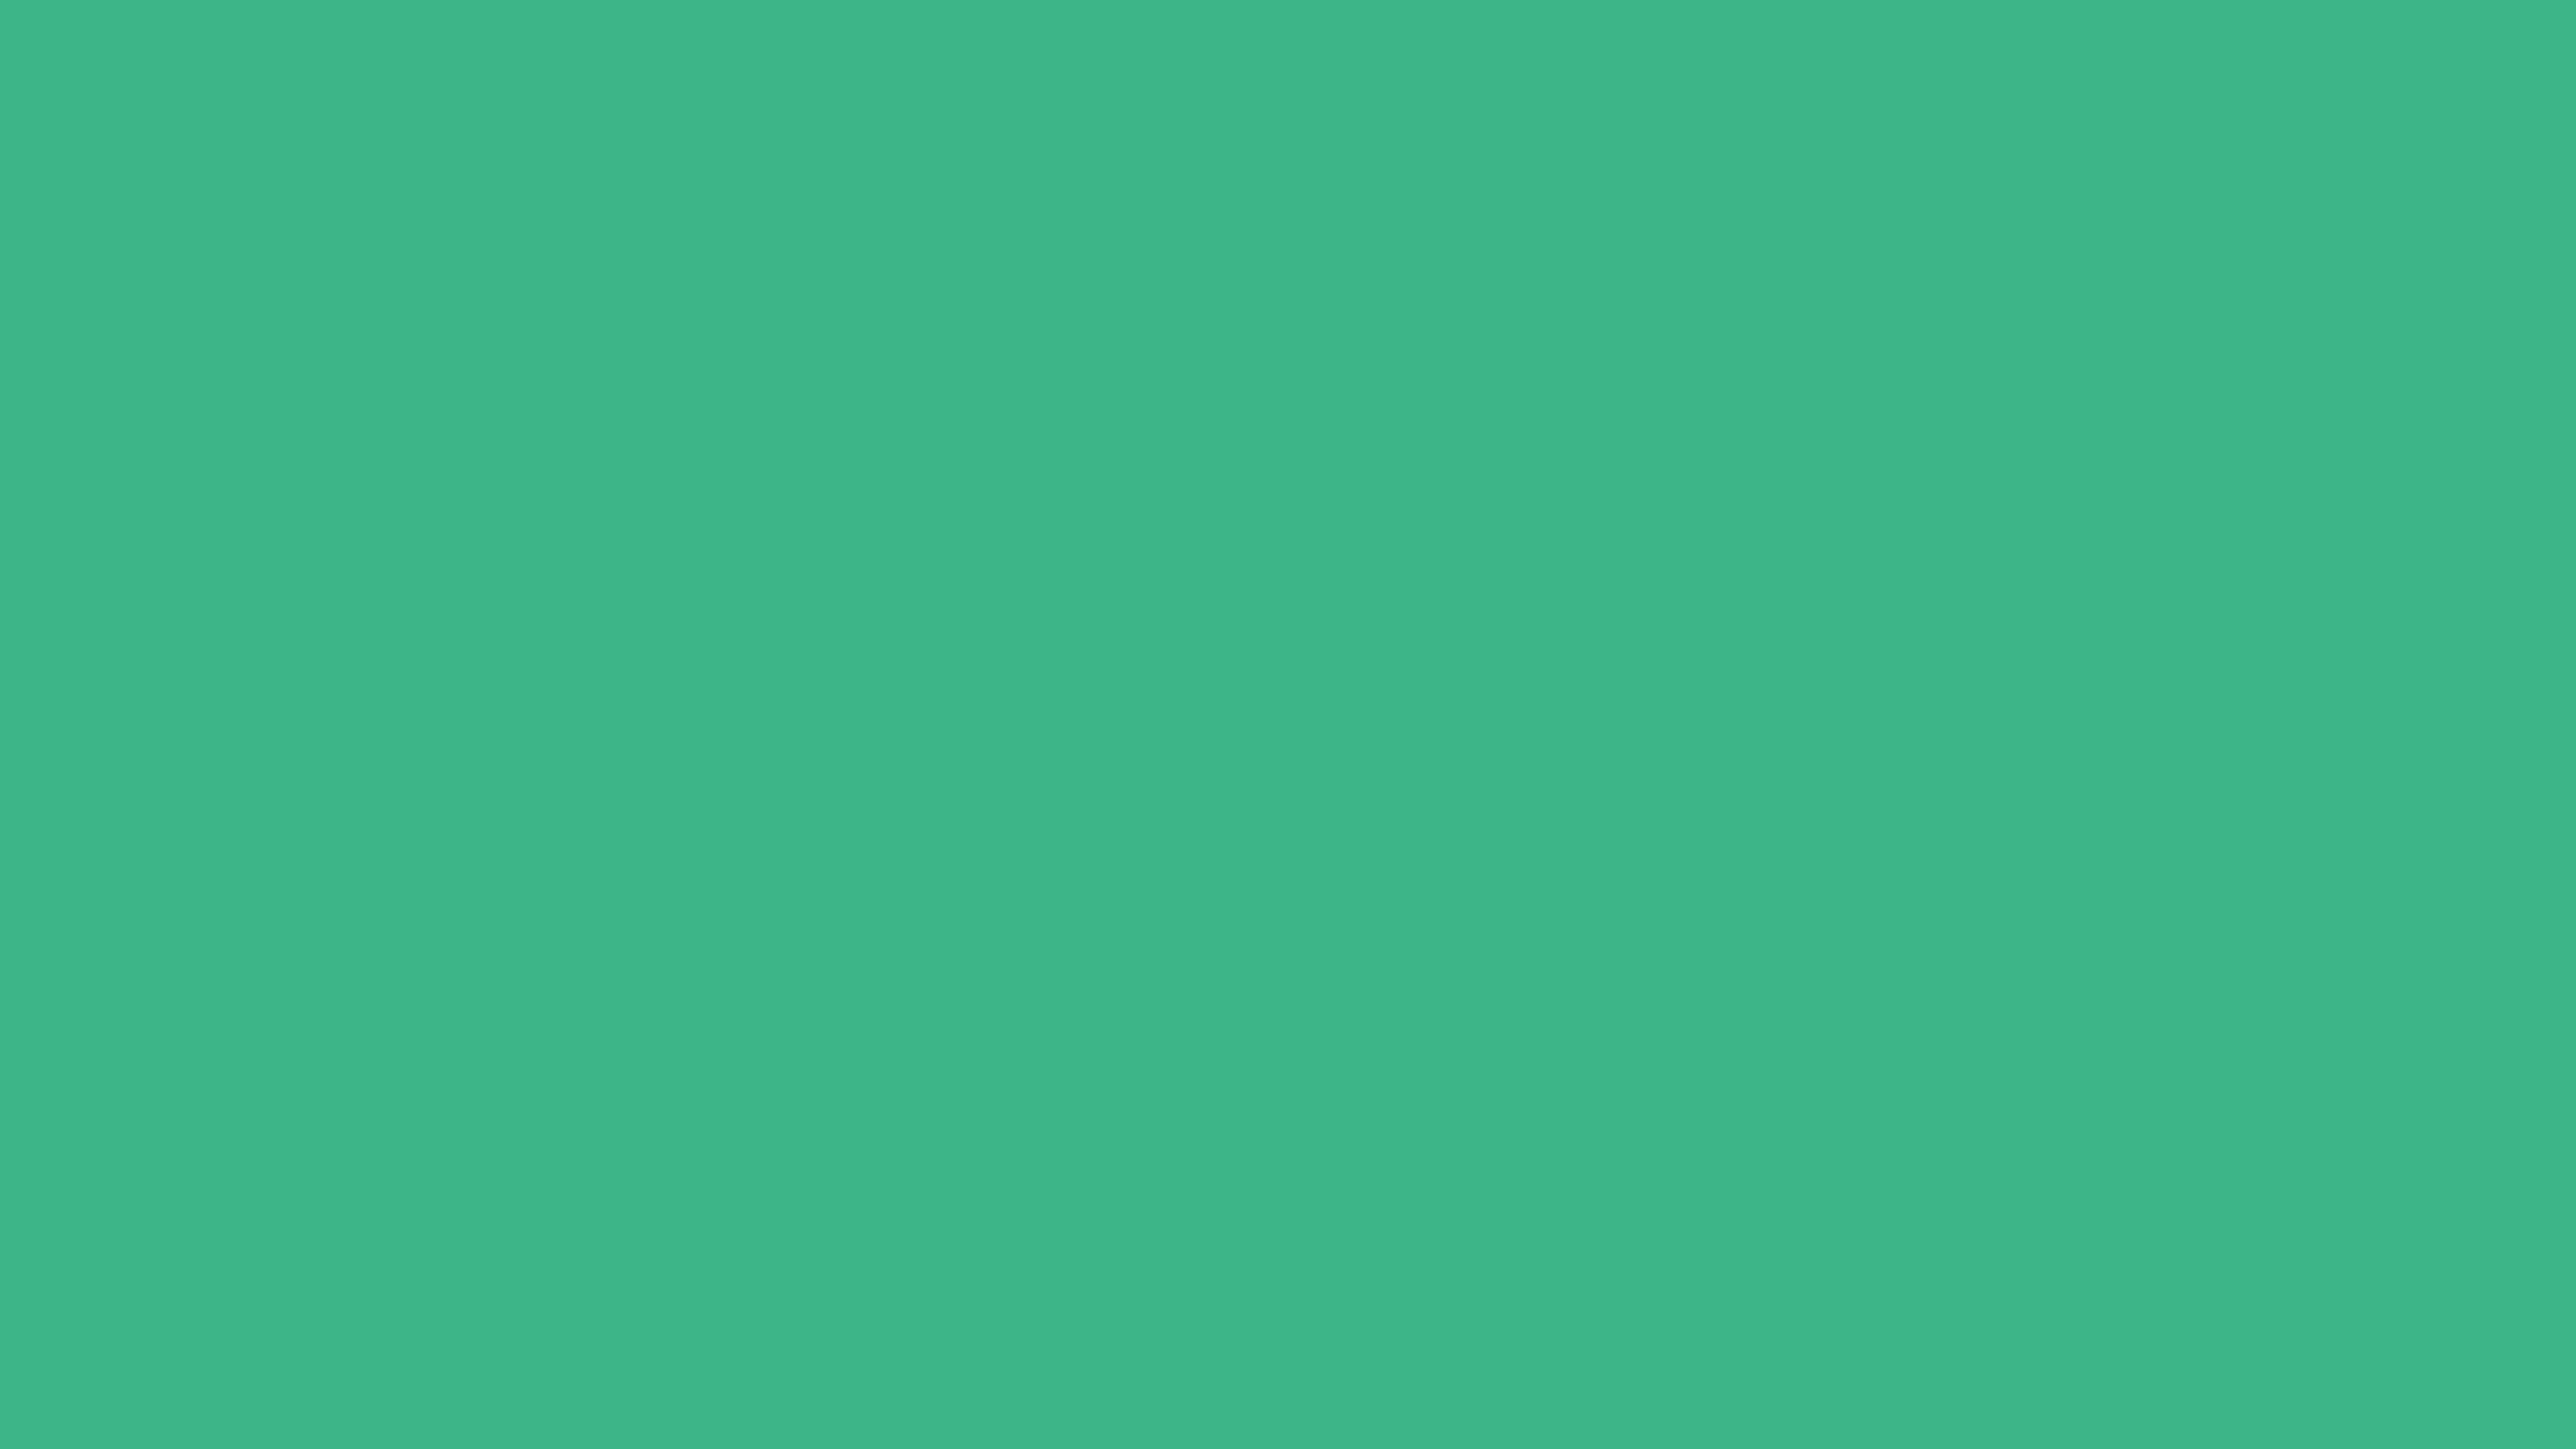 7680x4320 Mint Solid Color Background